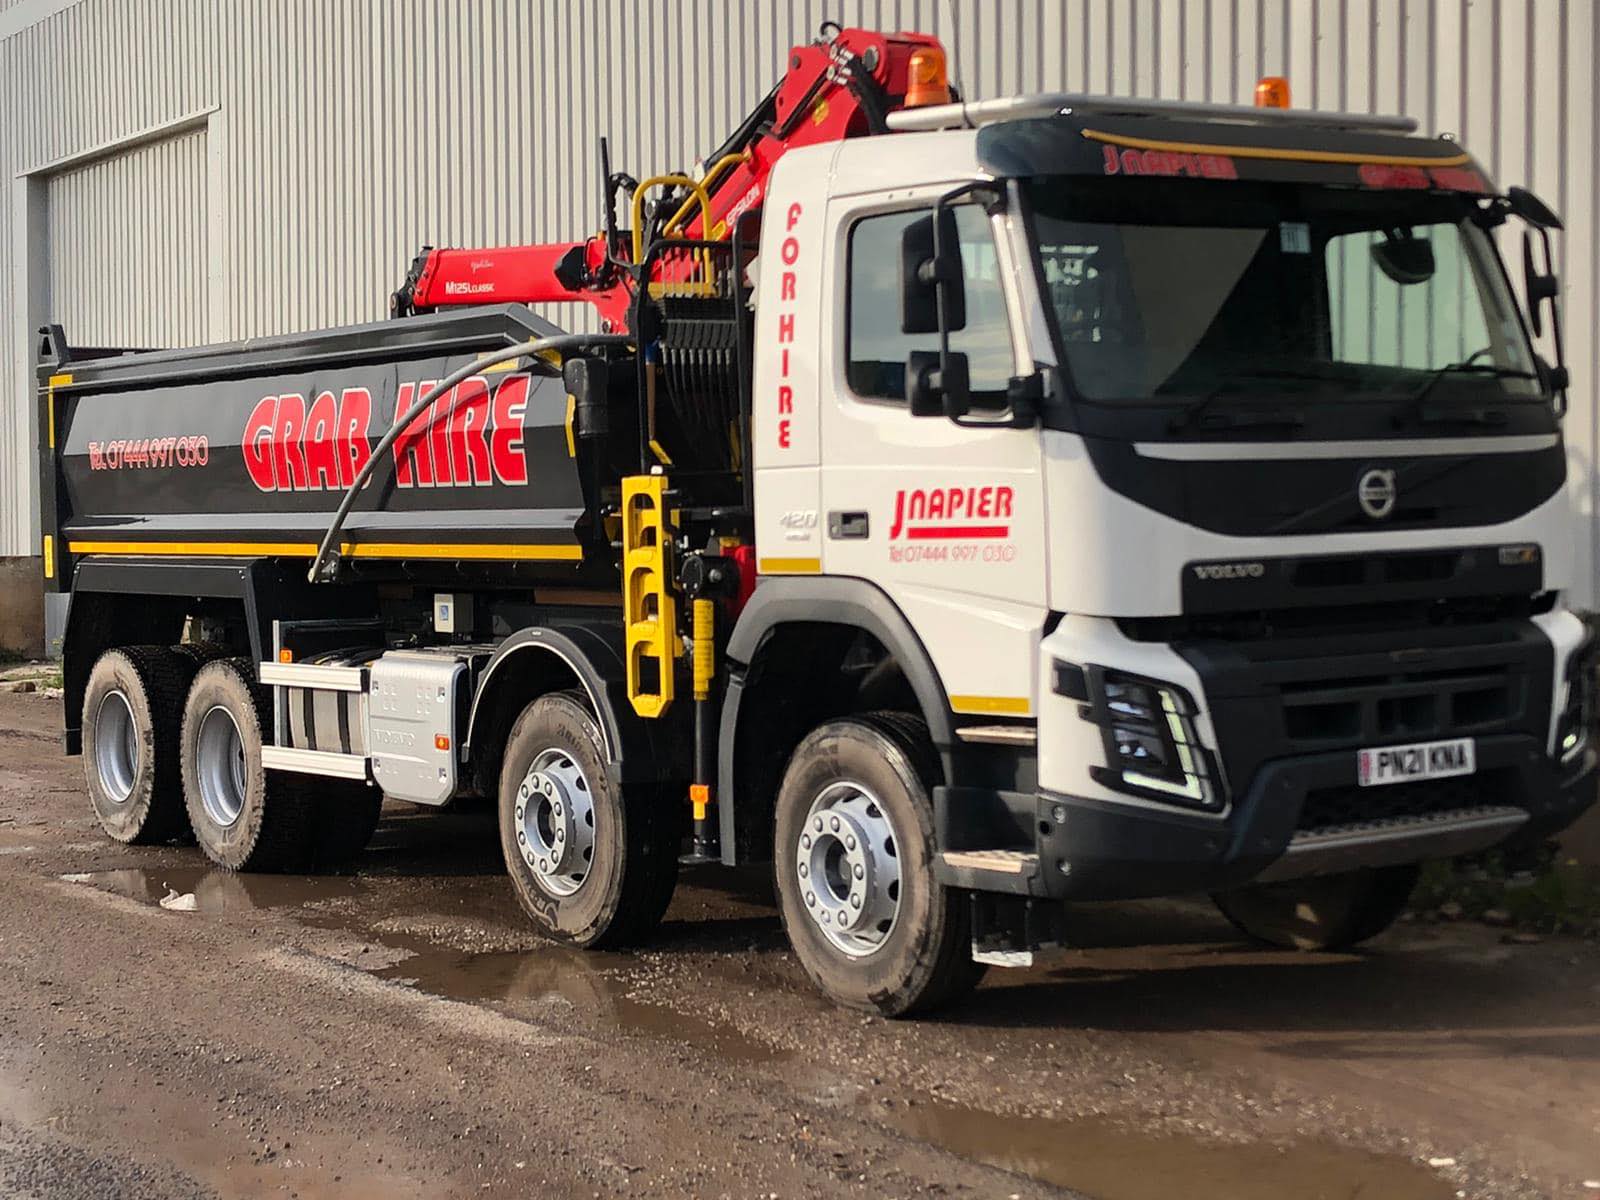 Main image for J Napier Grab and Tipper Hire